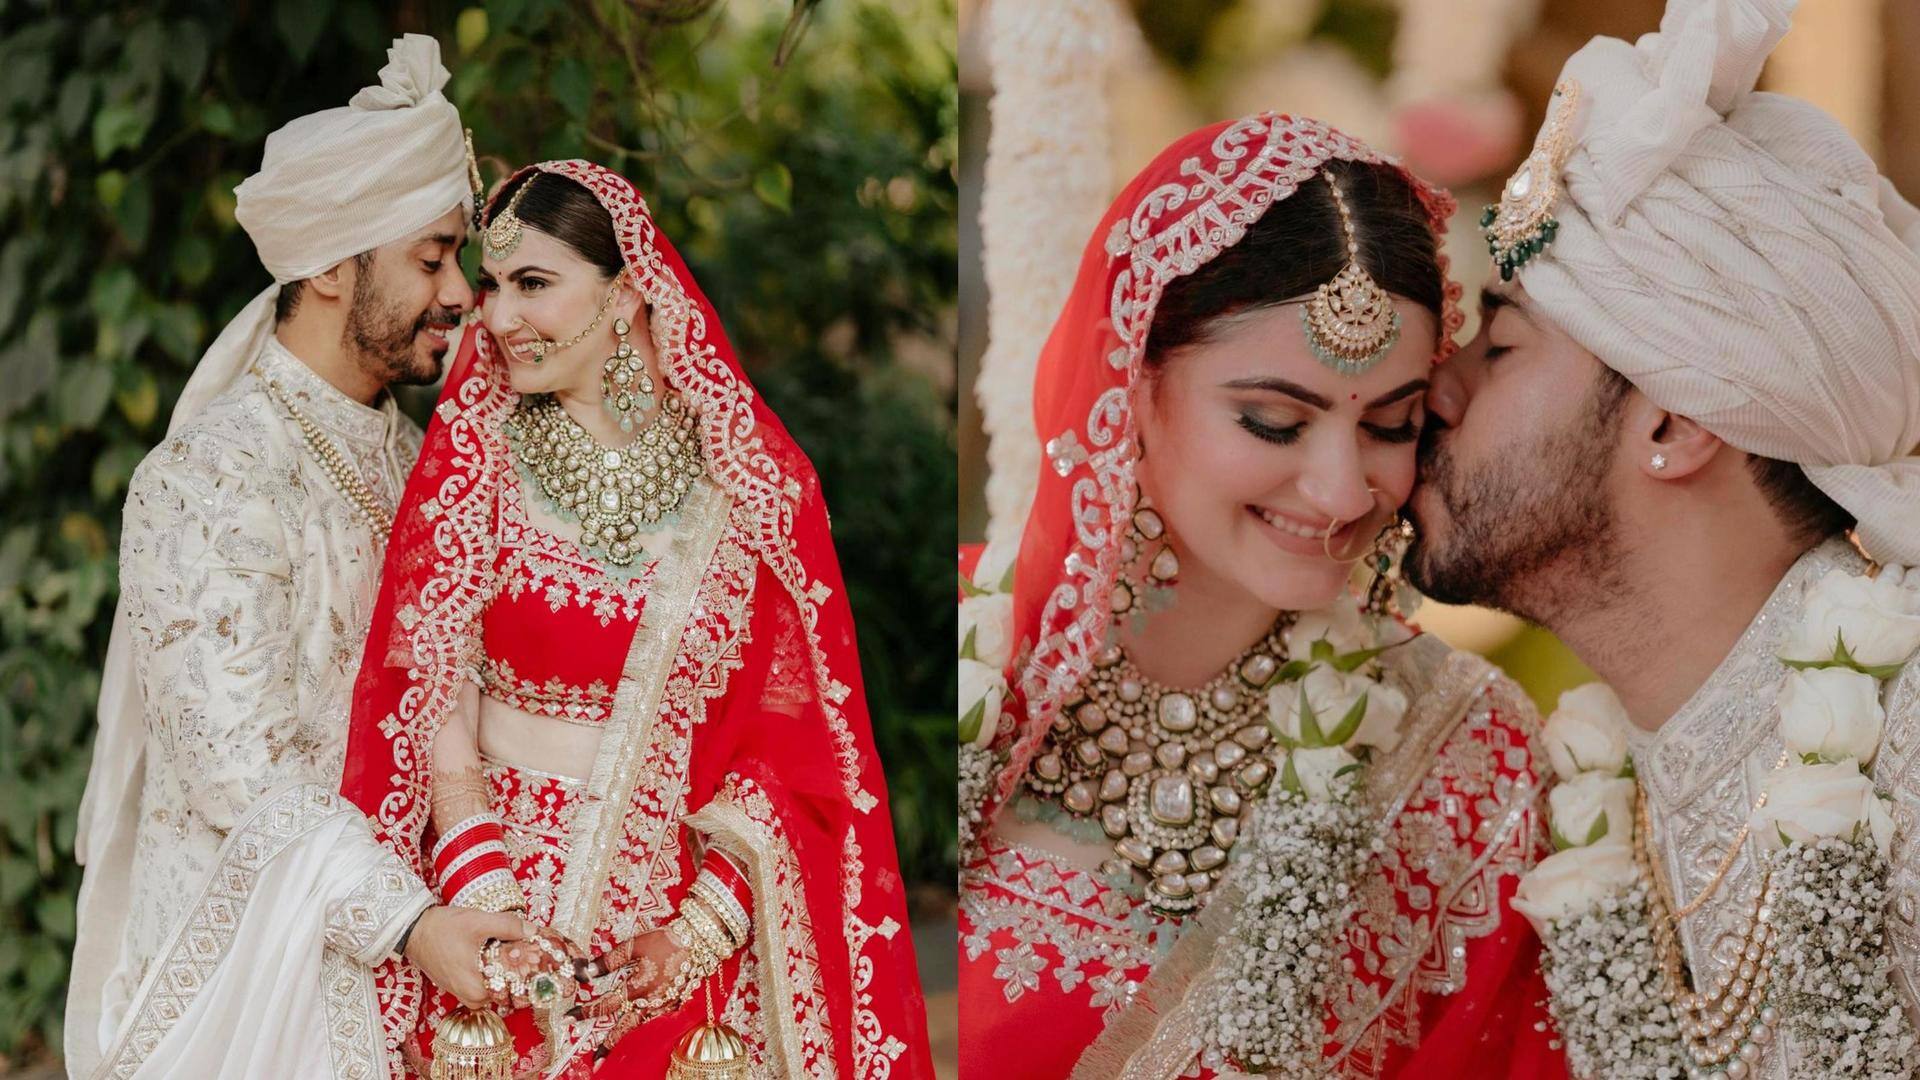 Actor Shivaleeka Oberoi marries director Abhishek Pathak: First pictures out!